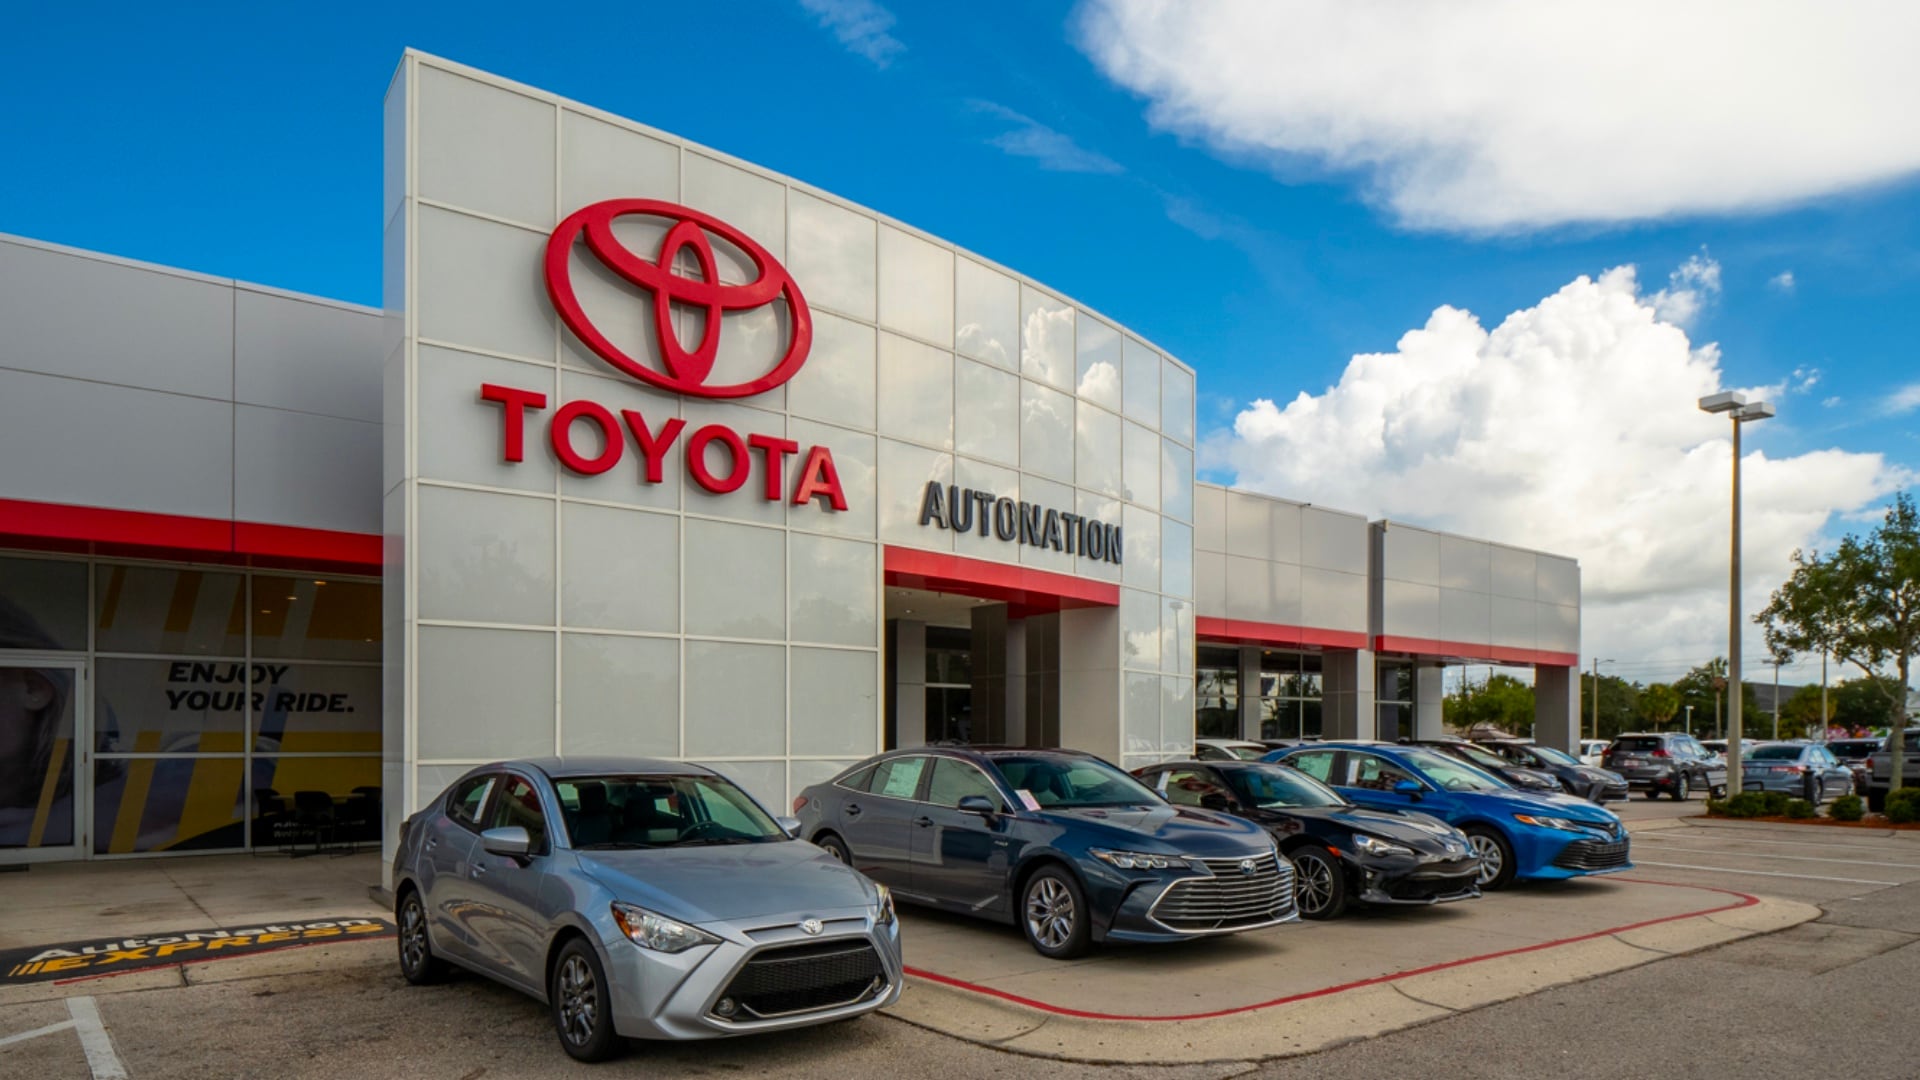 Exterior view of AutoNation Toyota Winter Park on a partly cloudy day. The building is grey and white and has some large windows. Several vehicles can be seen near the building, which also has some trees nearby.